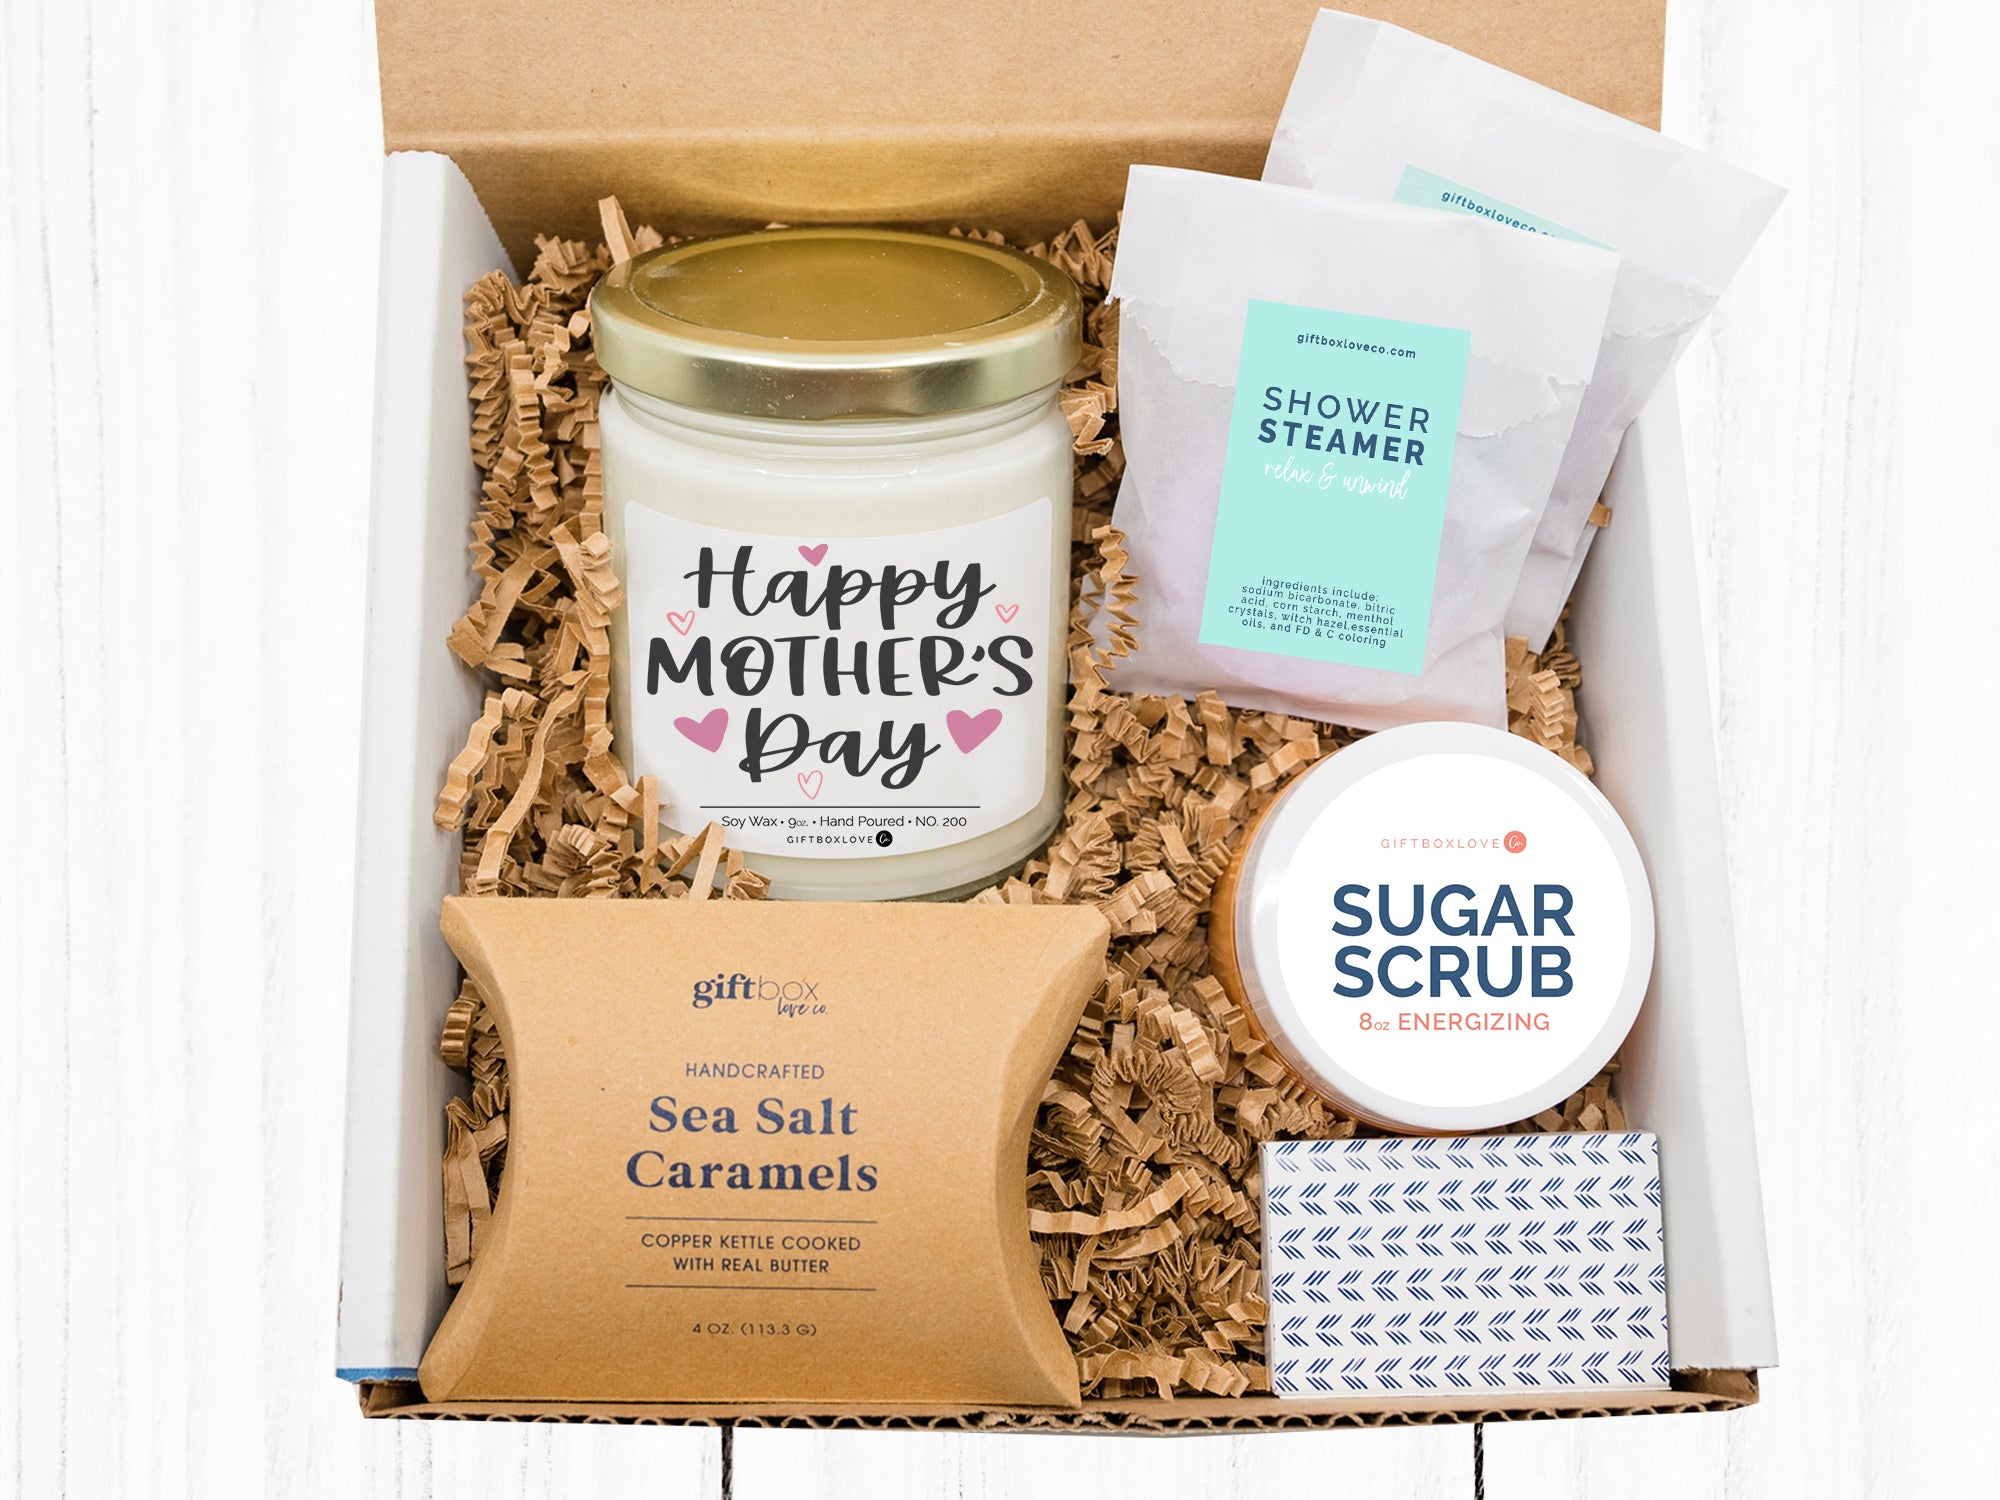 Happy Mother's Day Candle Gift Box with Caramels